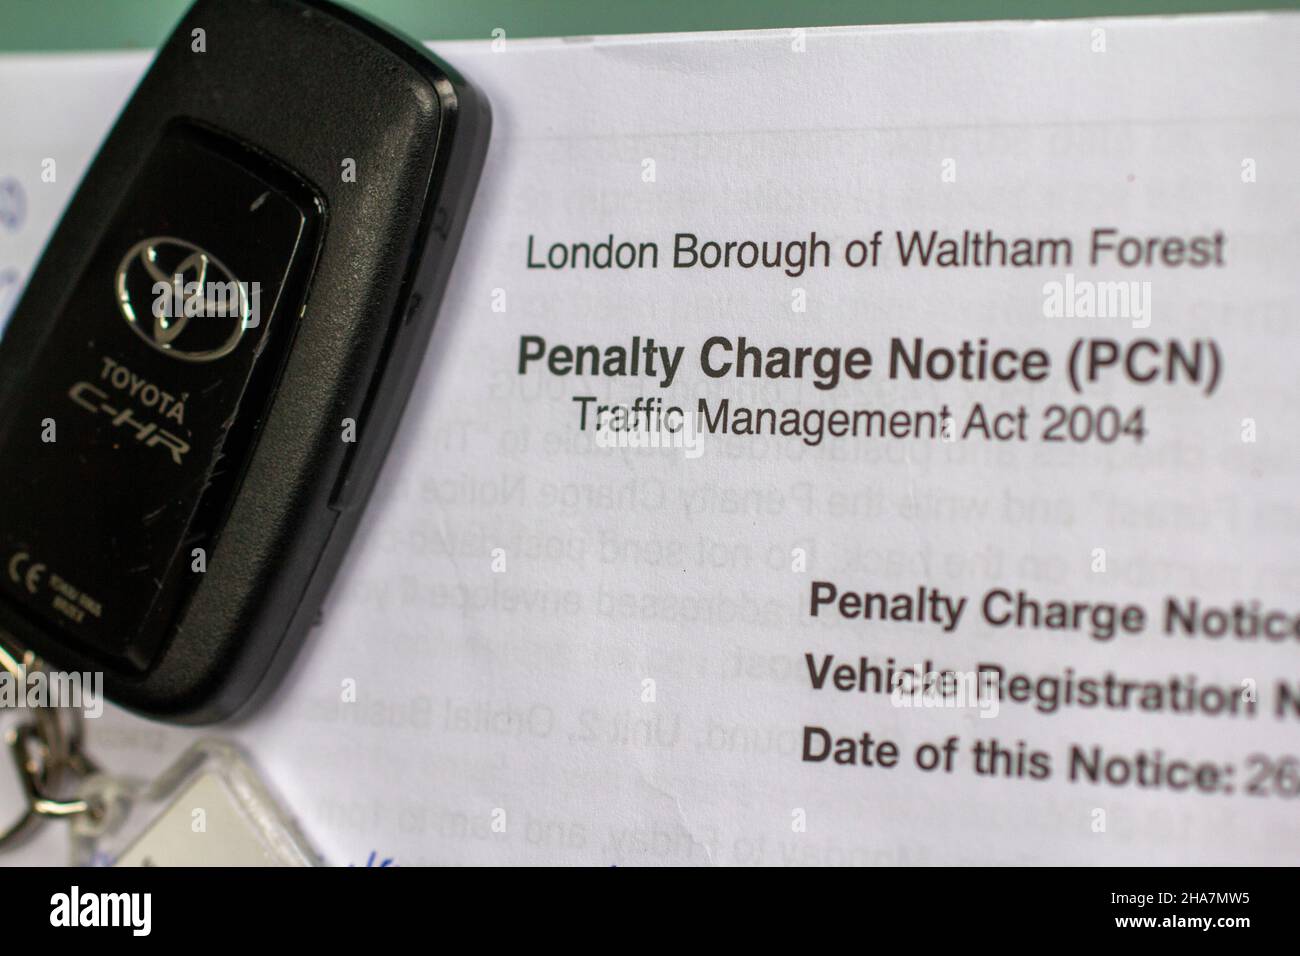 PCN, penalty charge notice, issued by London   Borough of Waltham Forest for driving infringments, with car keys Stock Photo